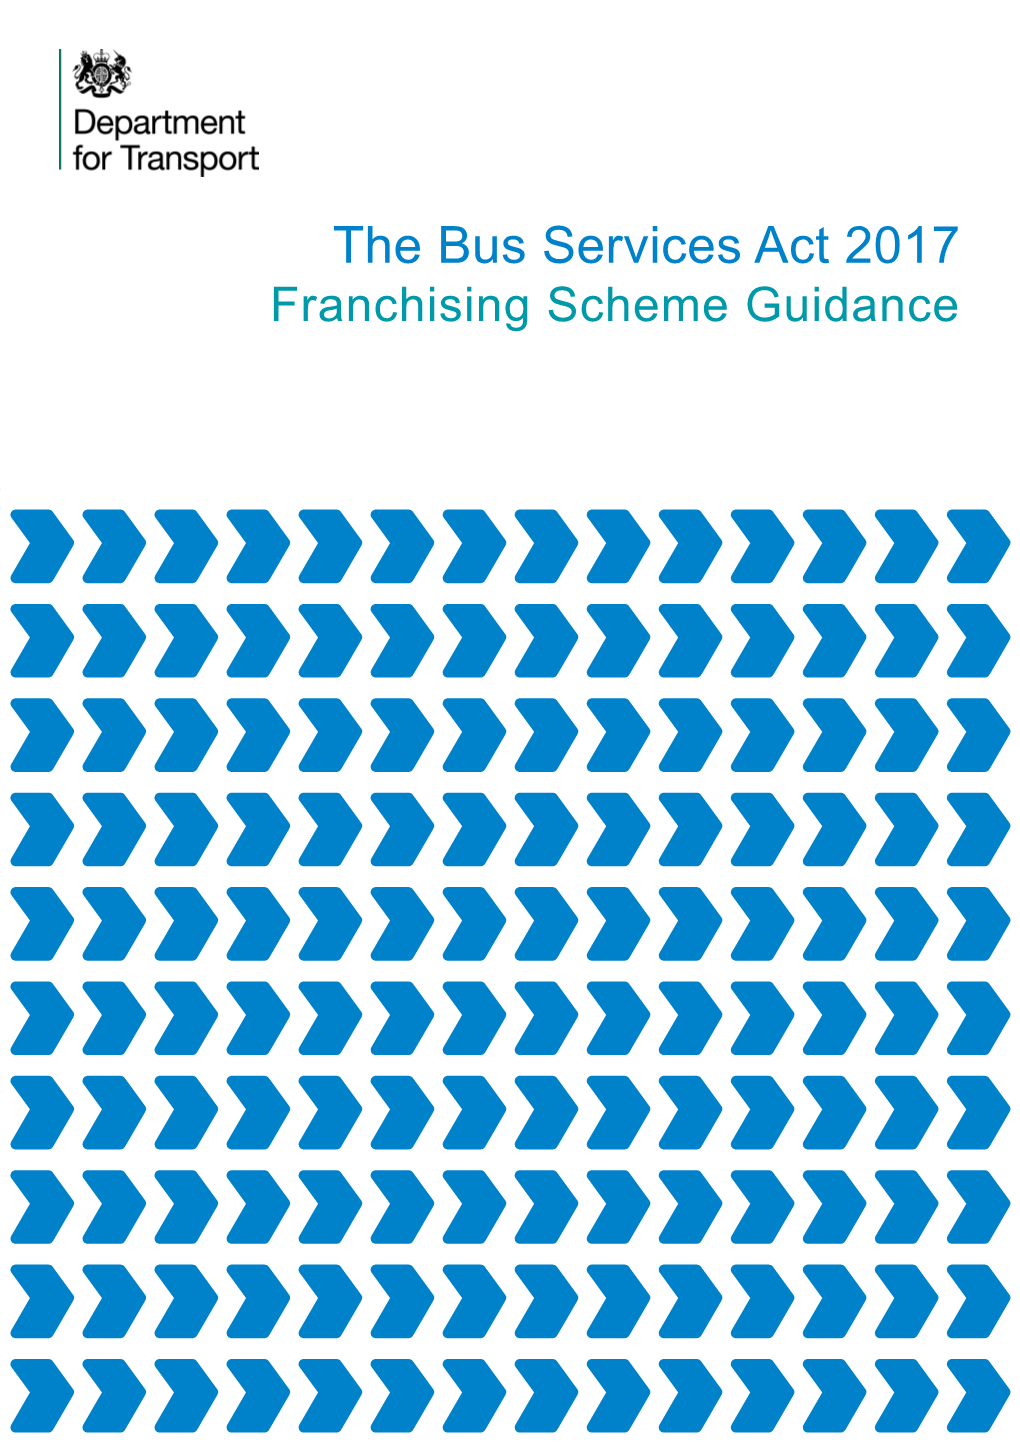 The Bus Services Act 2017 Franchising Scheme Guidance